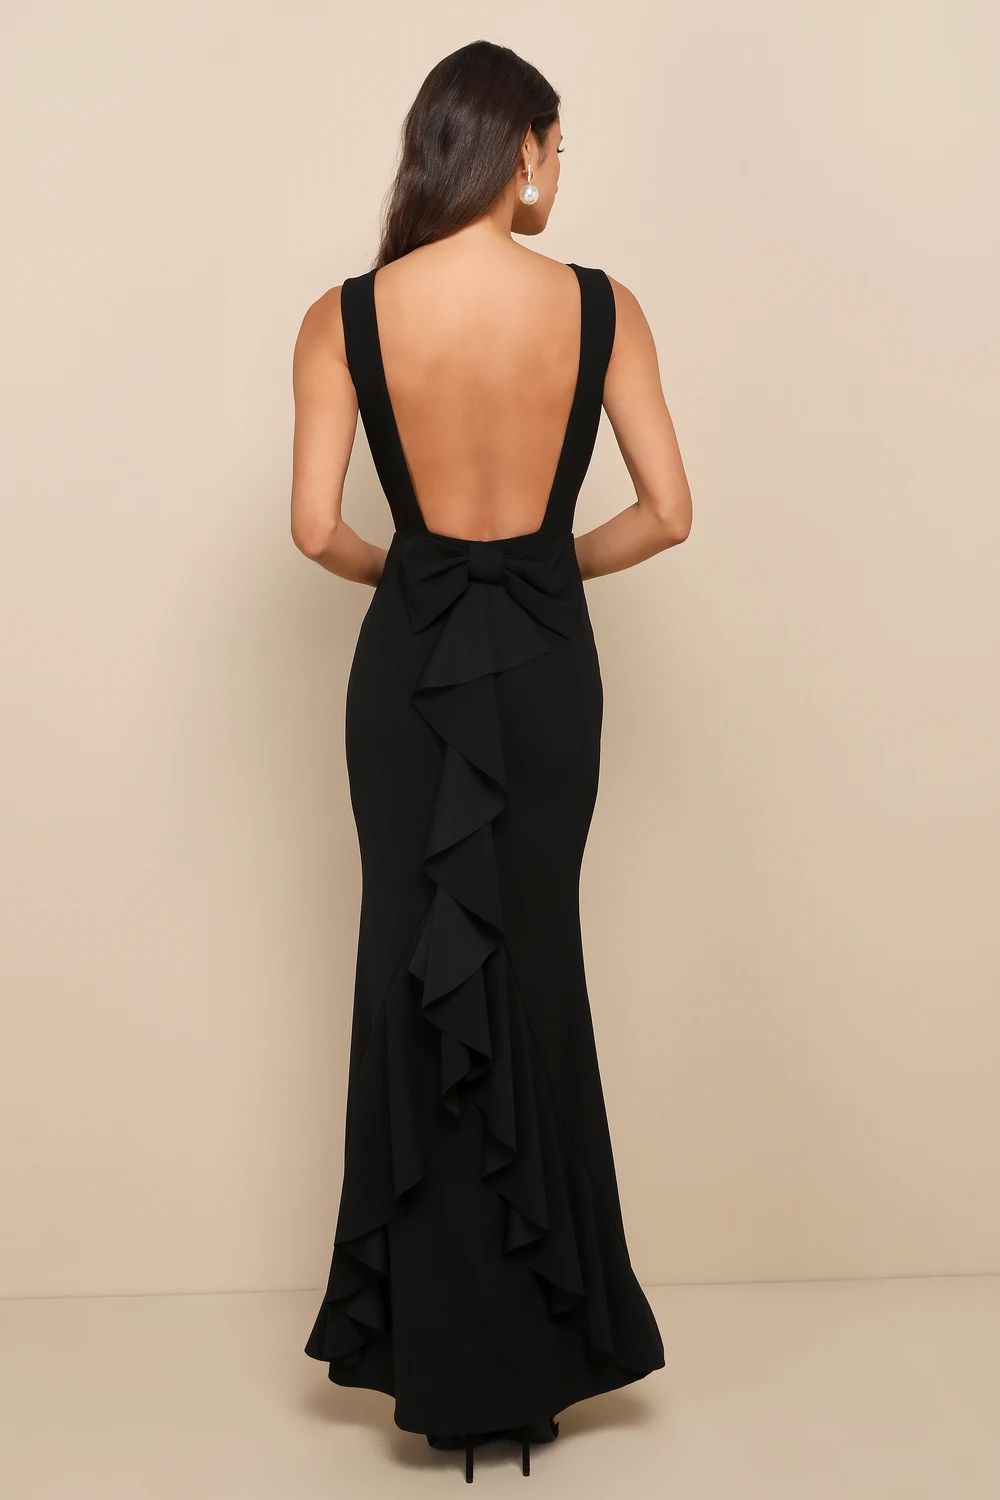 Exquisite Refinement Black Backless Bow Ruffled Maxi Dress | Lulus